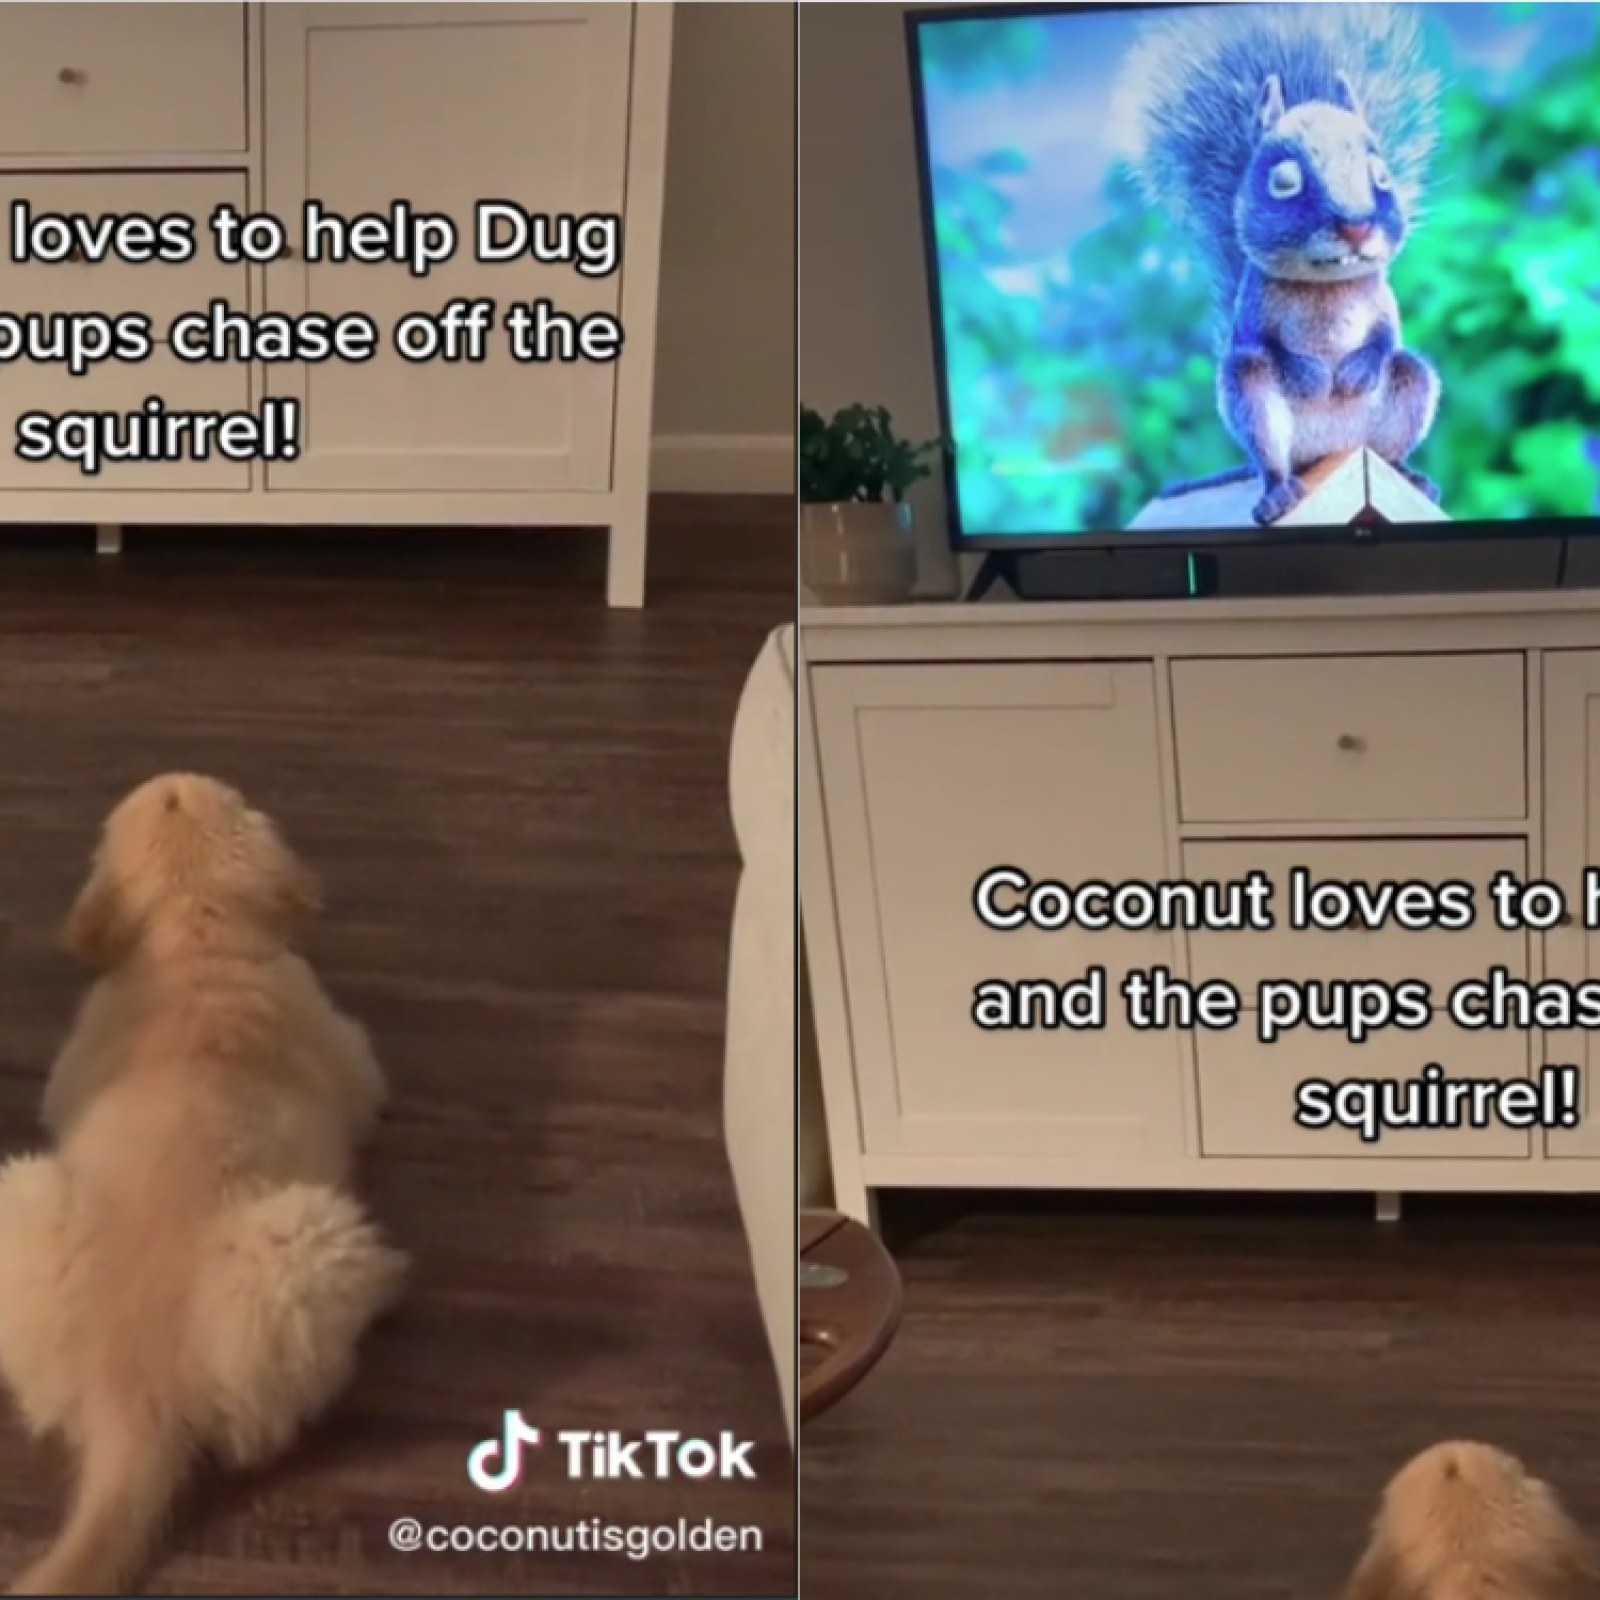 Puppy Helps Cartoon Dog 'Chase Off' Squirrel on TV in Adorable Video